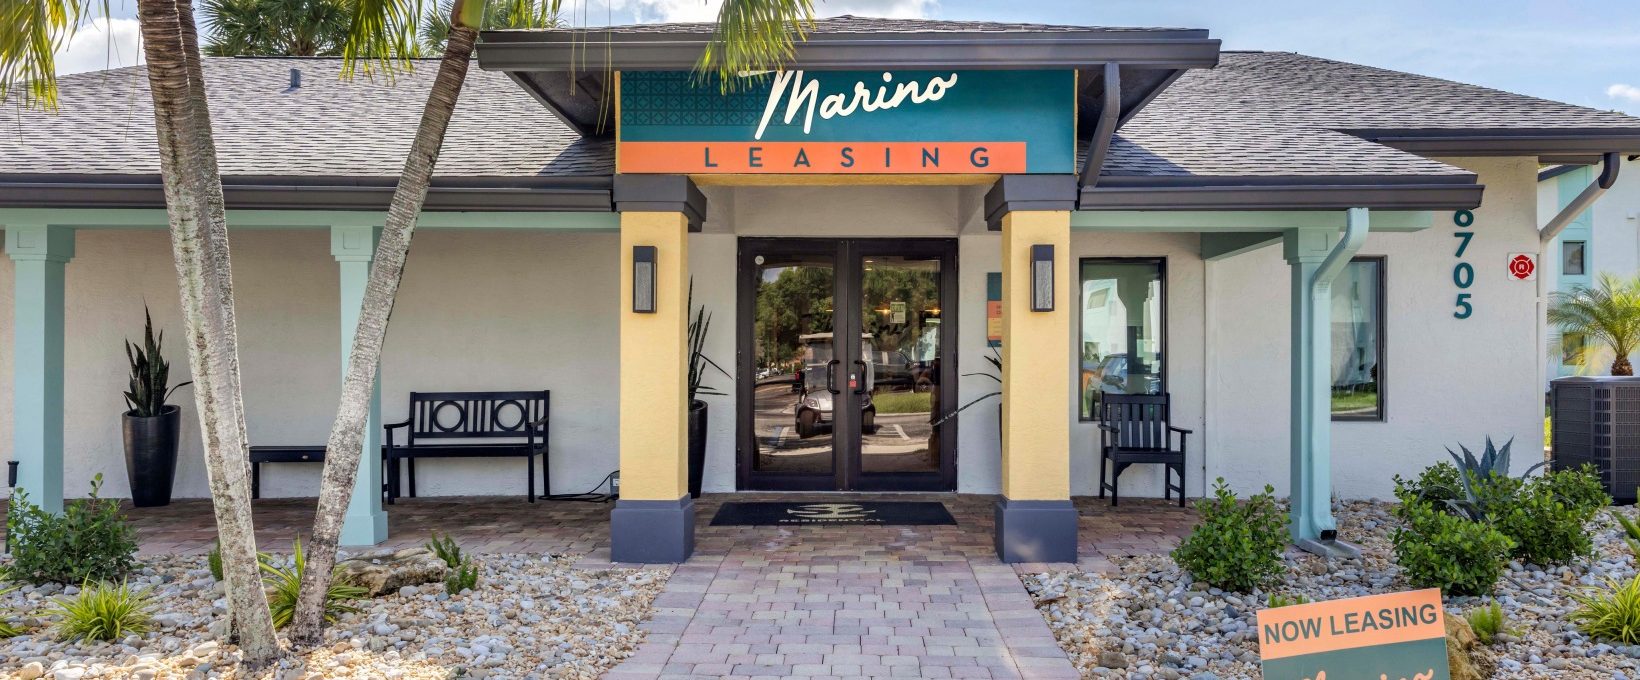 the front entrance to a business with palm trees and a sign that says marina at The Marino